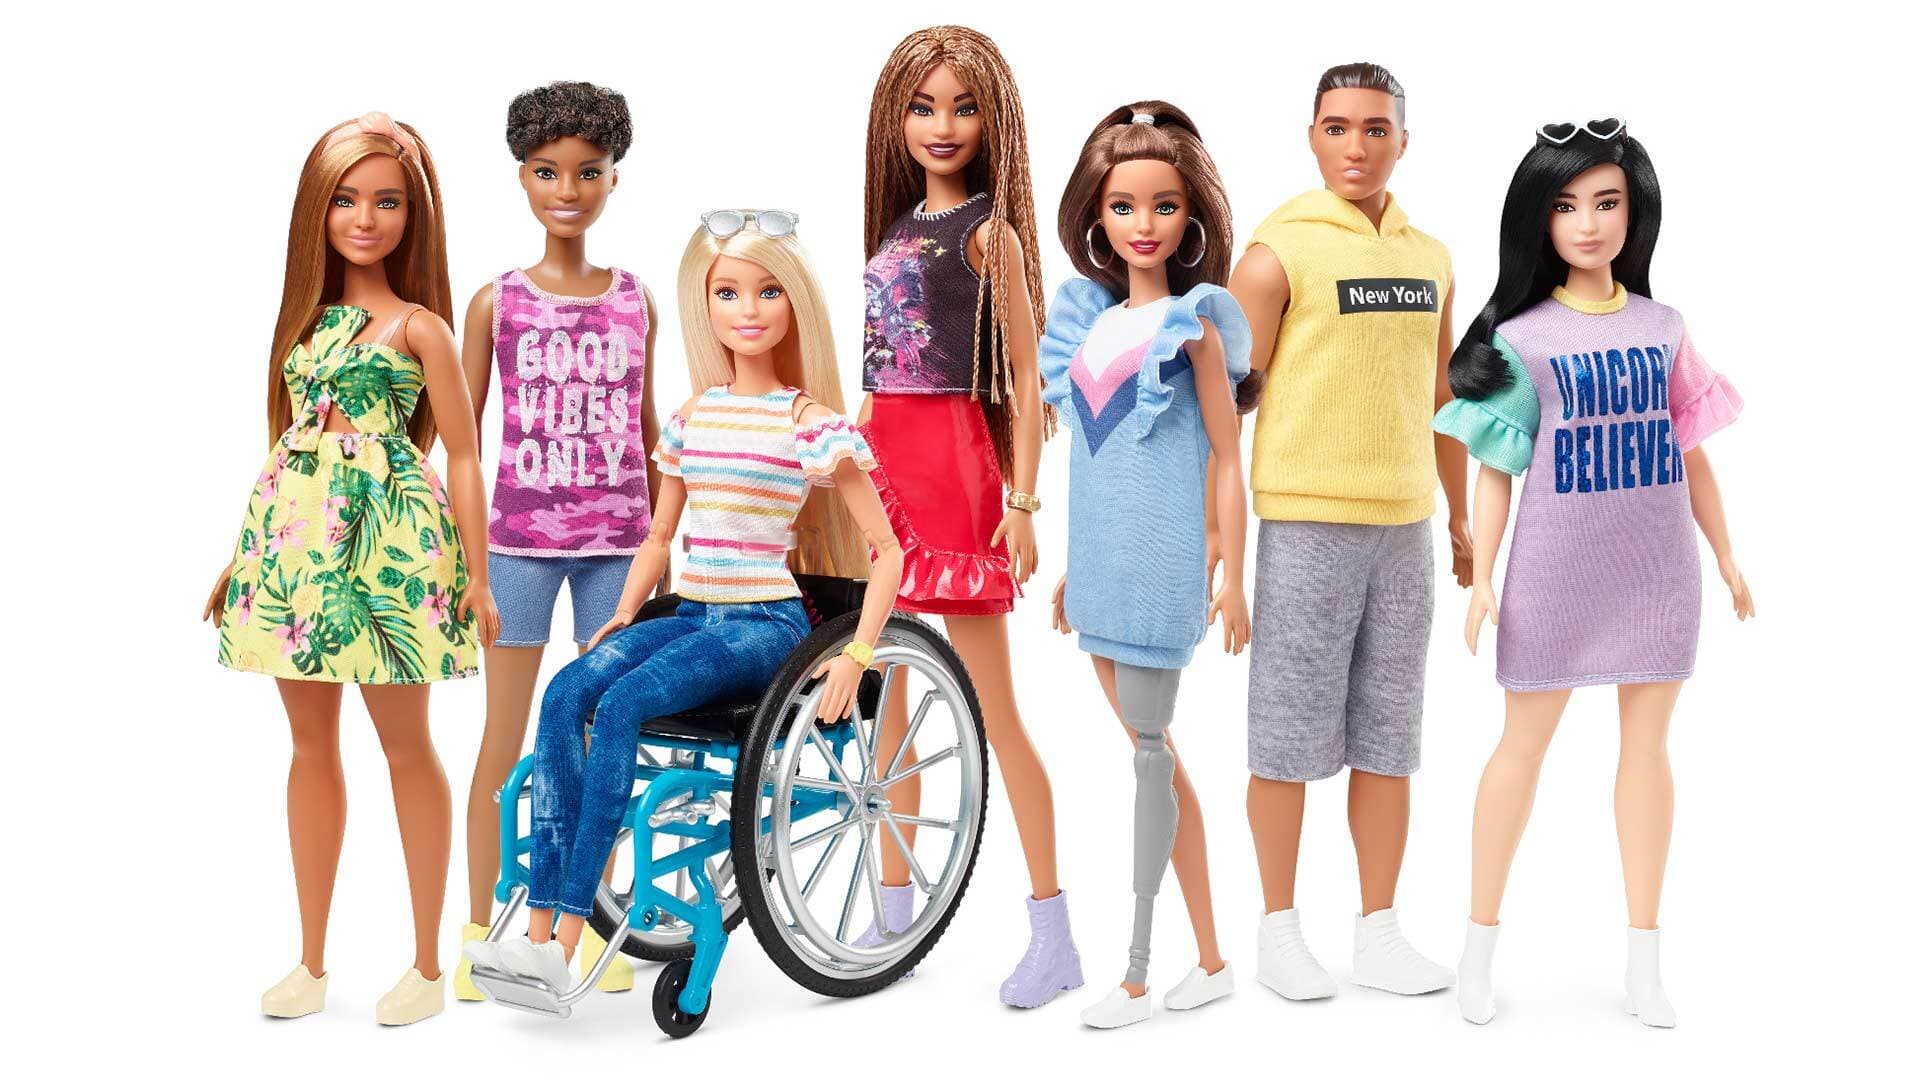 seven diverse Barbie dolls, including one in a wheelchair and one with a prosthetic leg